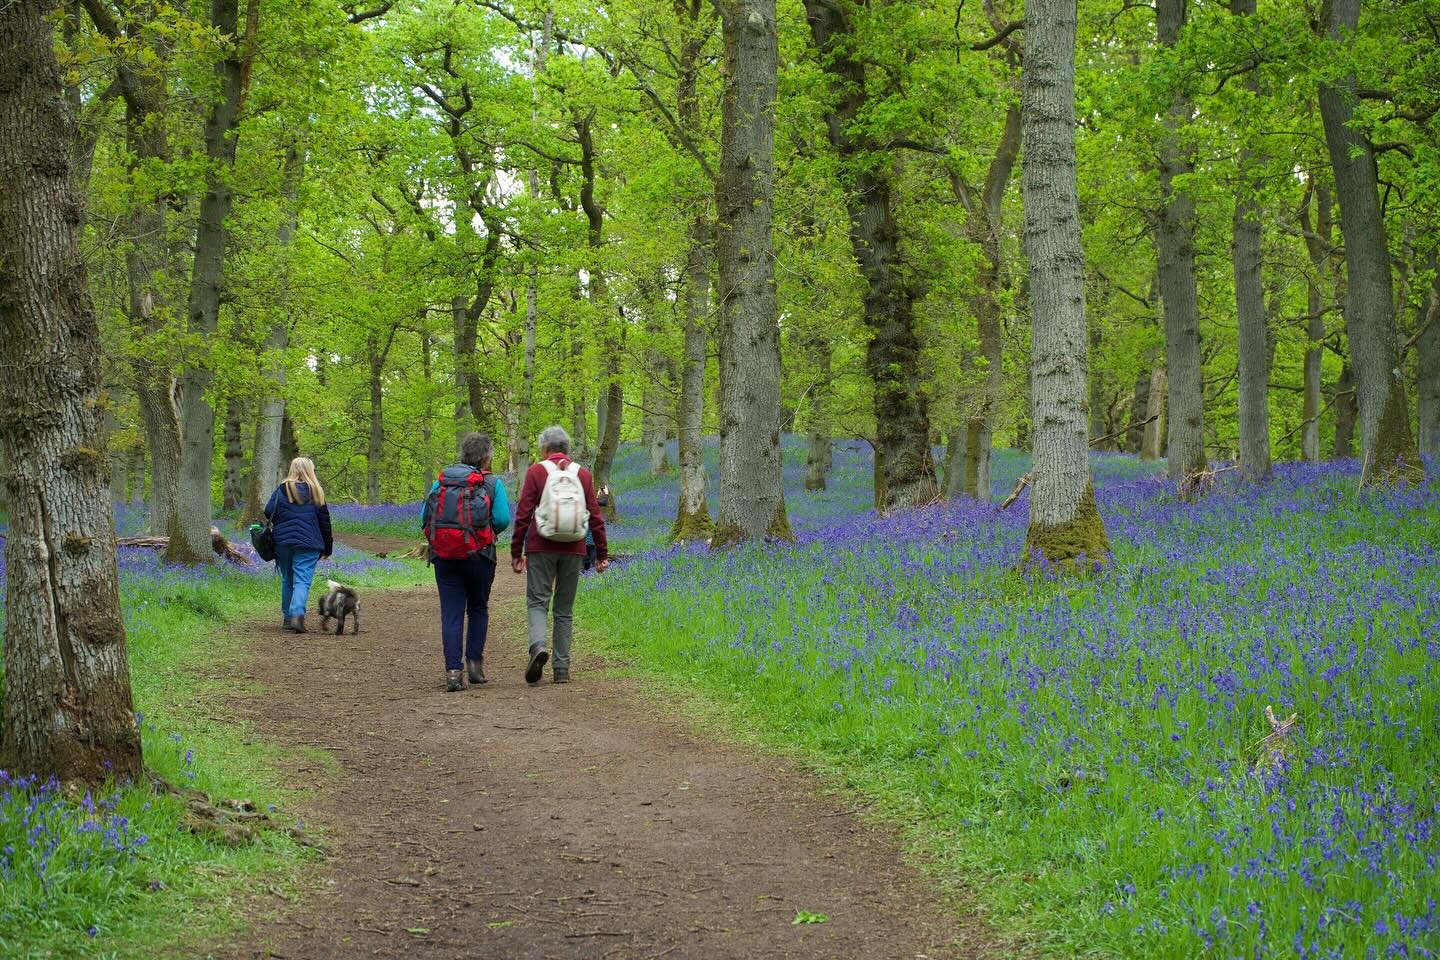 Have you been to see the bluebells yet? 

#perthshire #scotland #theperthshiremagazine #theperthshiremediaco #bluebells